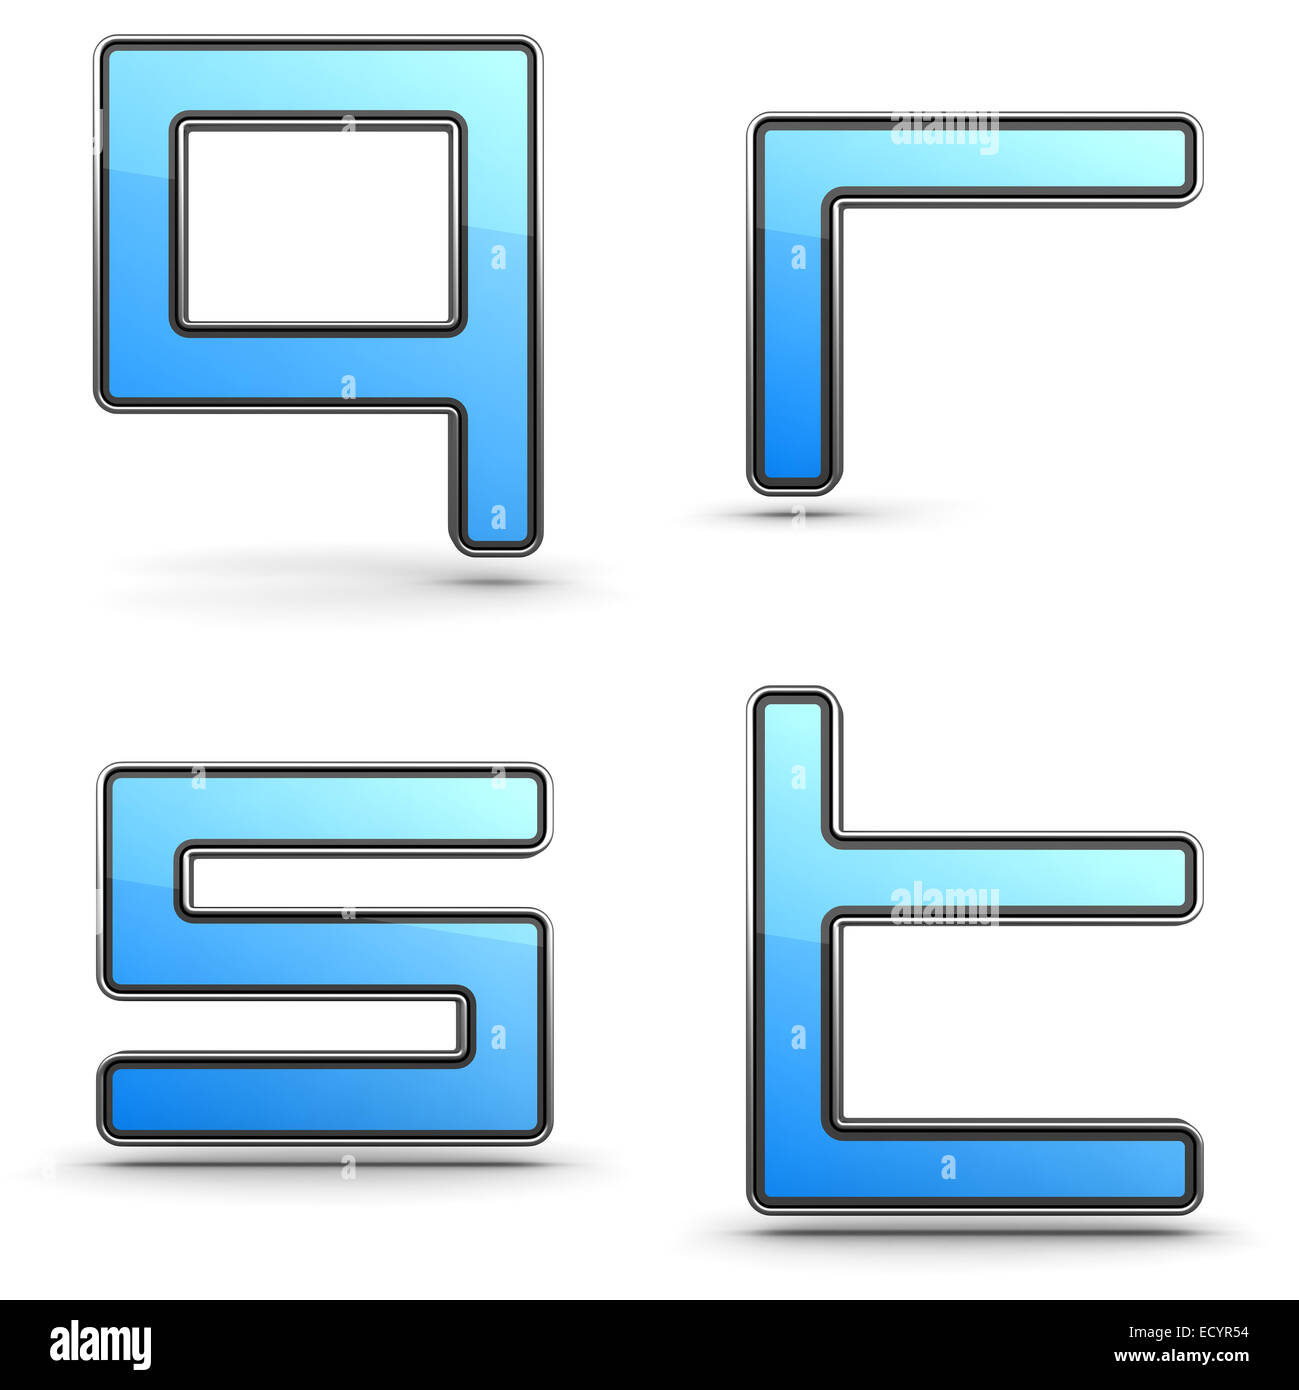 Letters Q, R, S, T - Set in Touchpad Style. Stock Photo